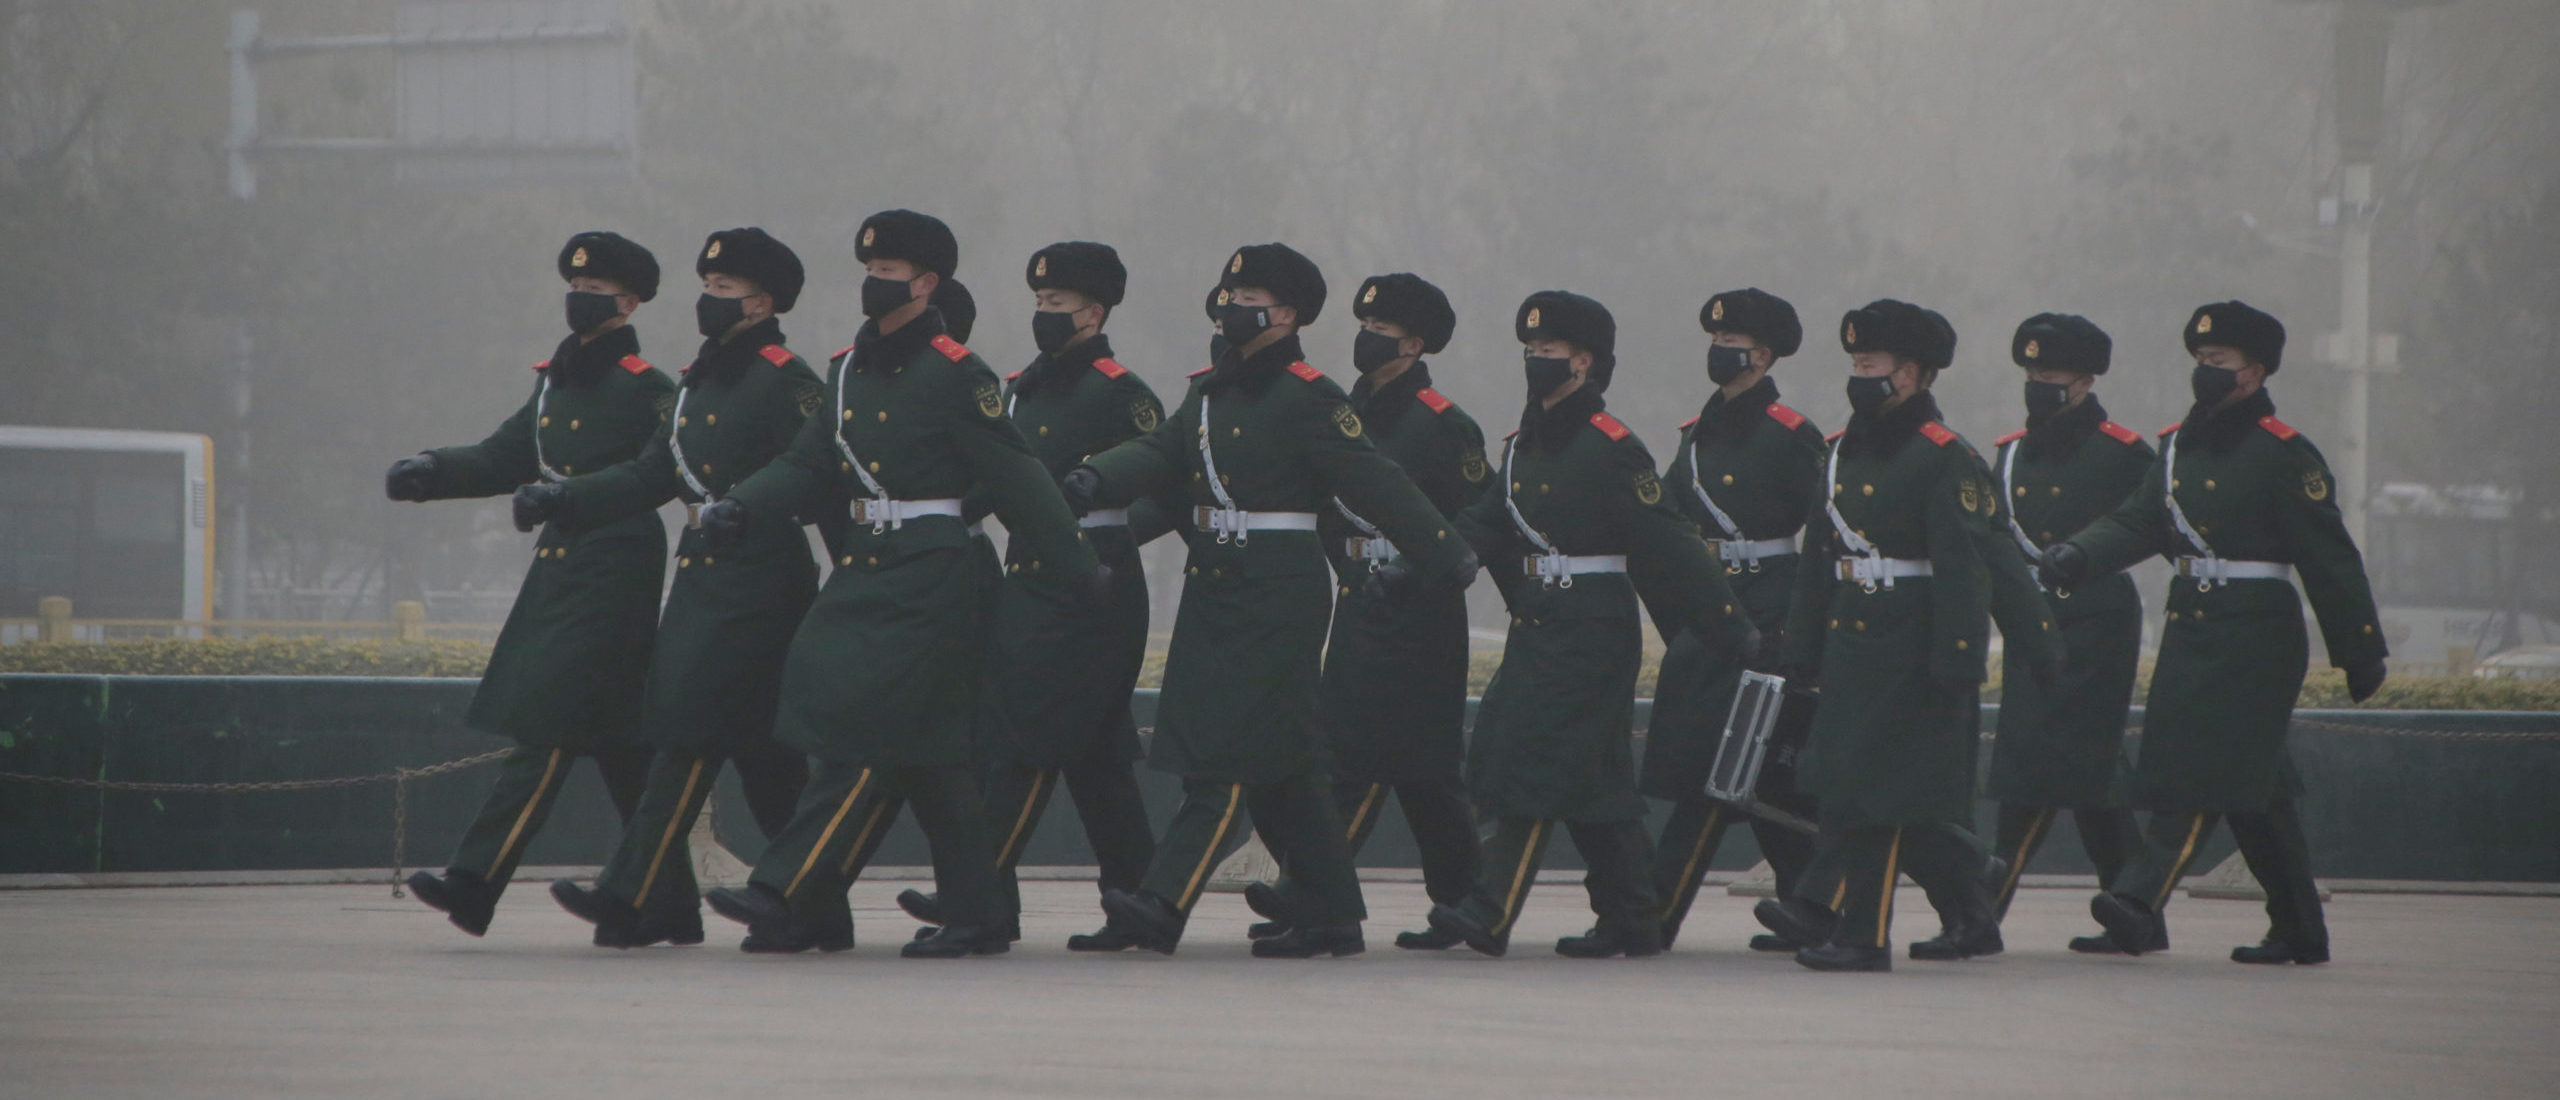 Paramilitary police officers wearing masks patrol in the smog at Tiananmen Square after a red alert was issued for heavy air pollution in Beijing, China, December 20, 2016. (REUTERS/Jason Lee)